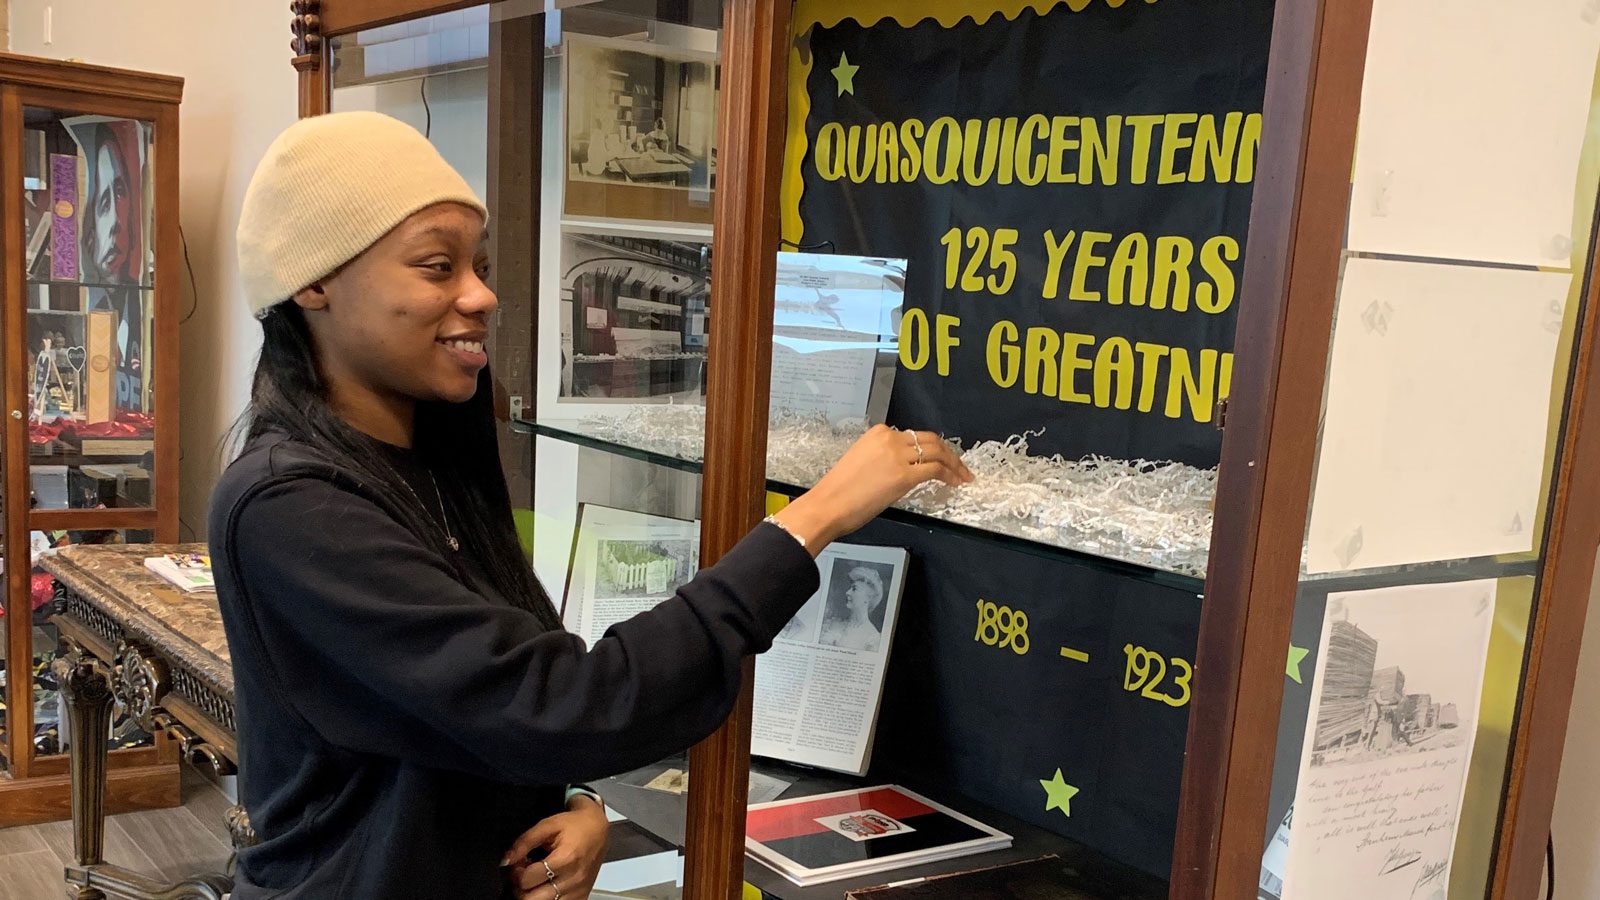 woman looks at quasquicentennial display at the public library in port arthur, texas